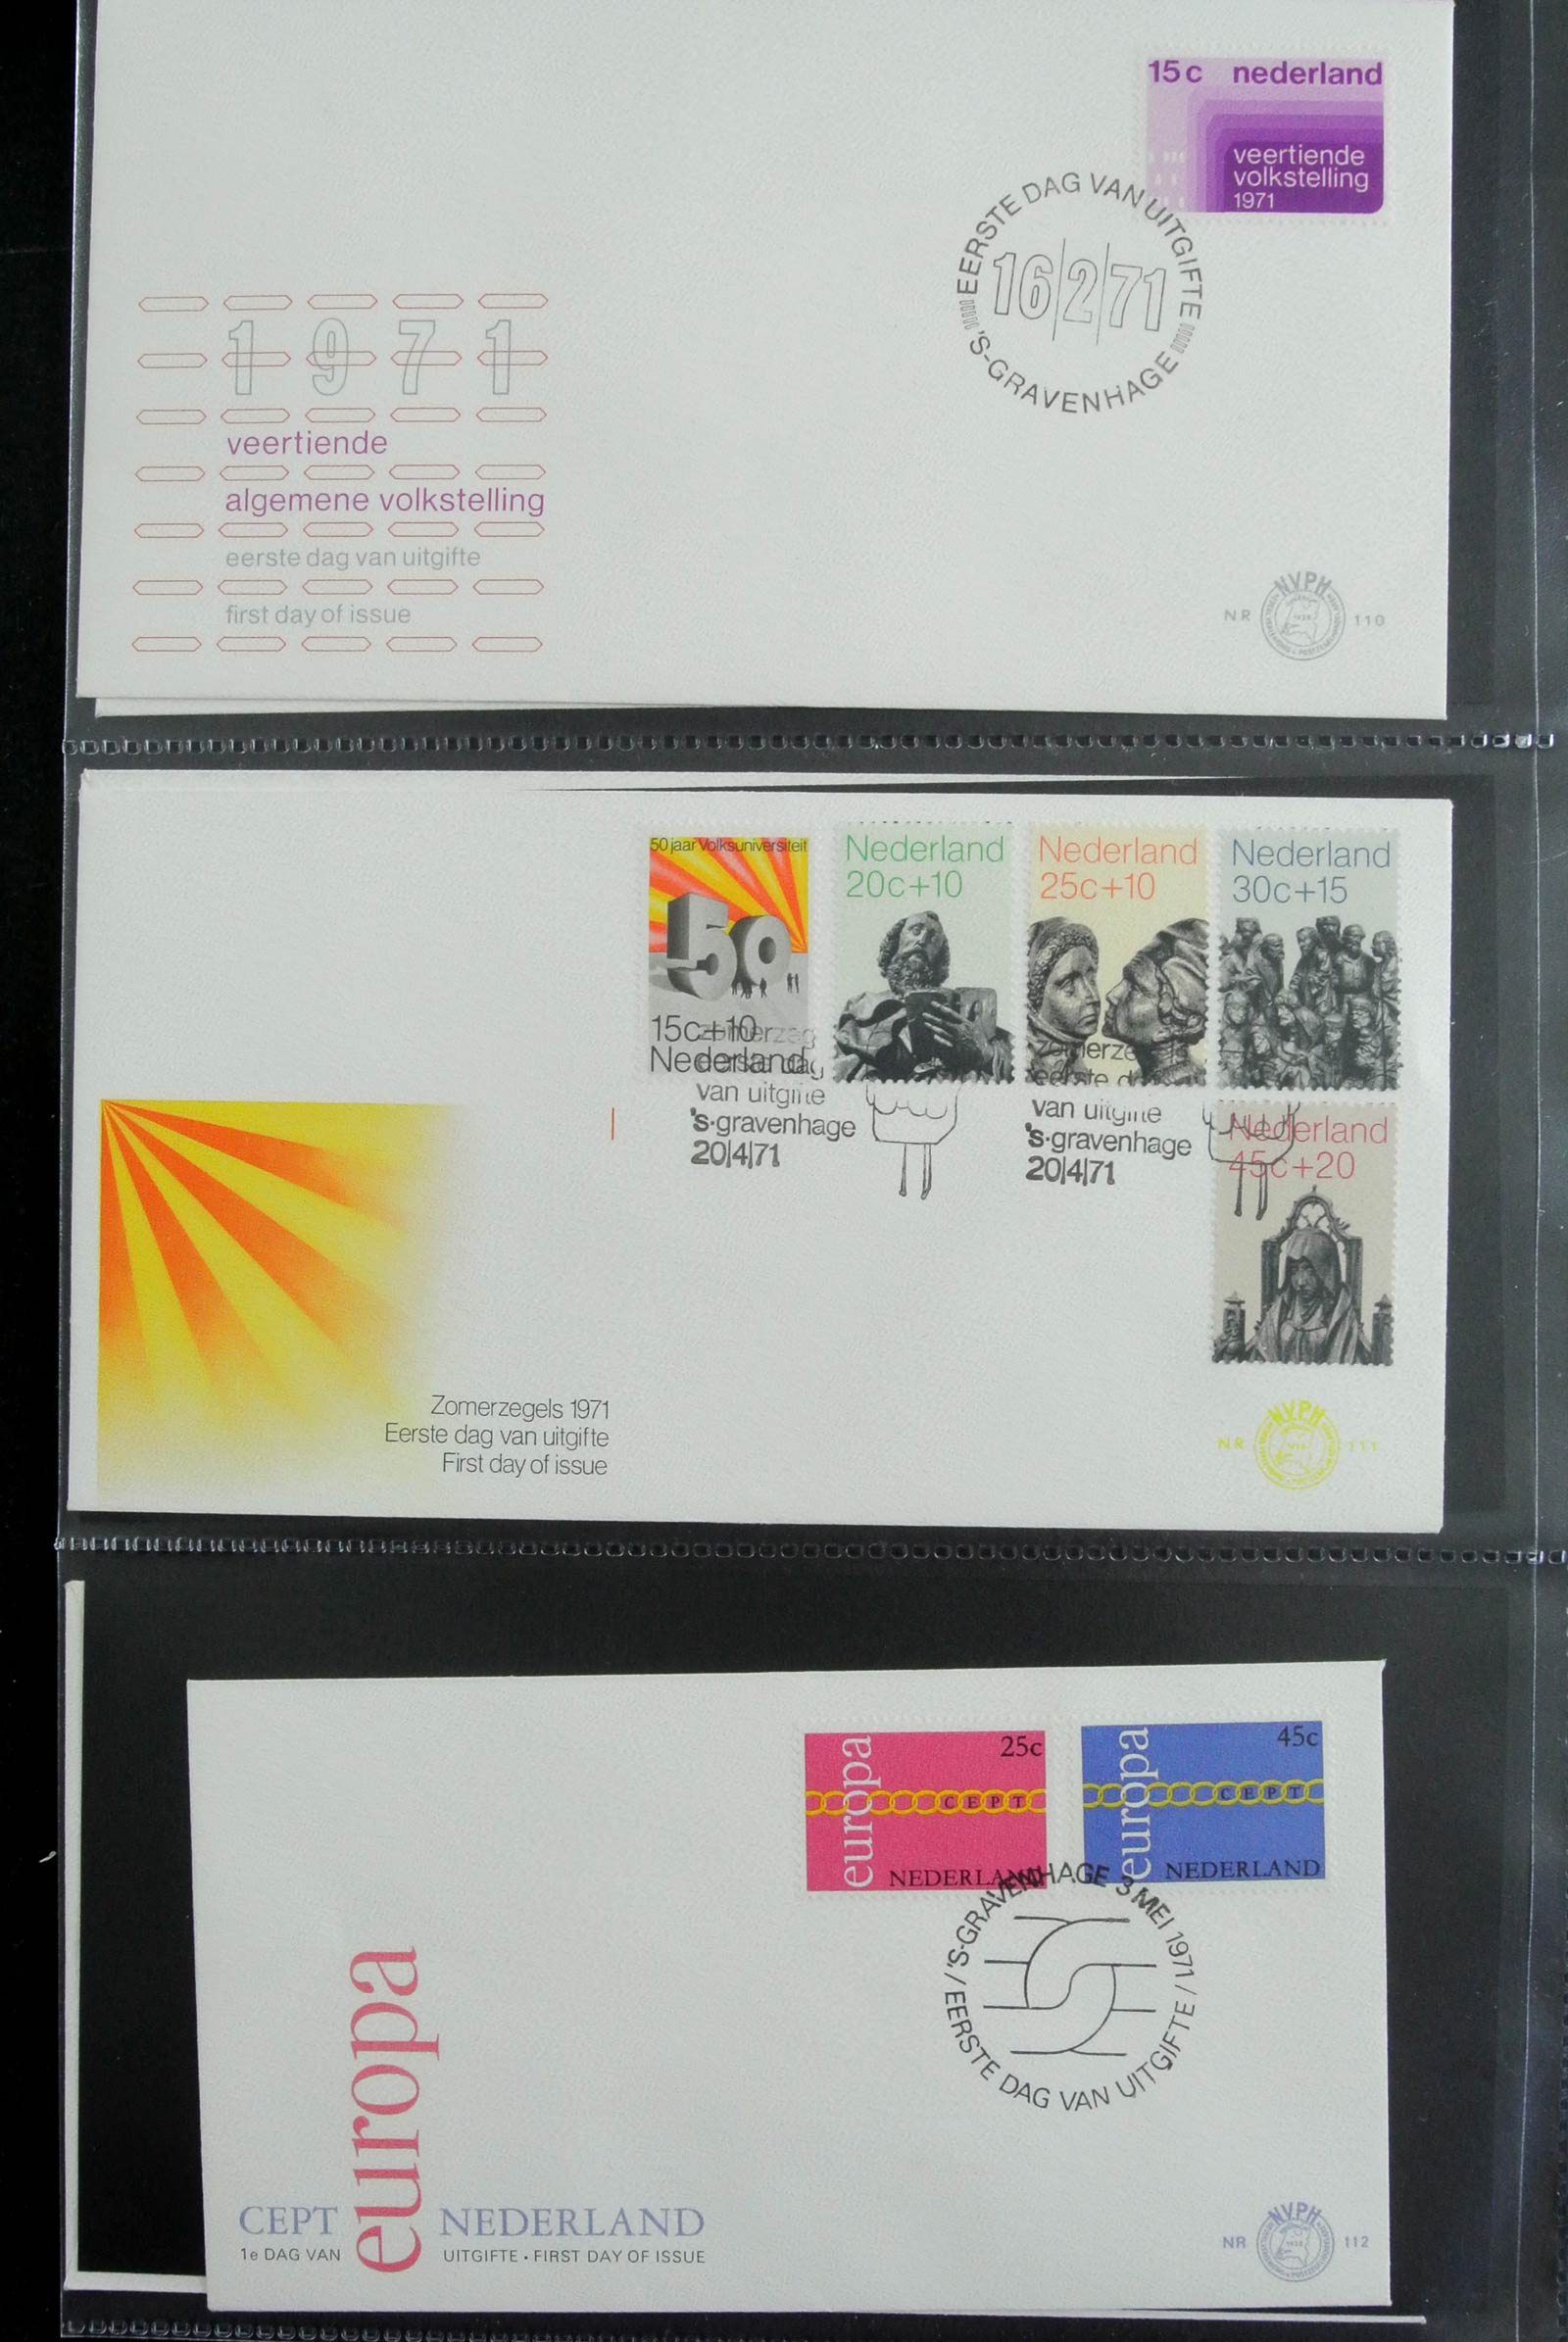 26929 038 - 26929 Netherlands 1950-2015 FDC's.